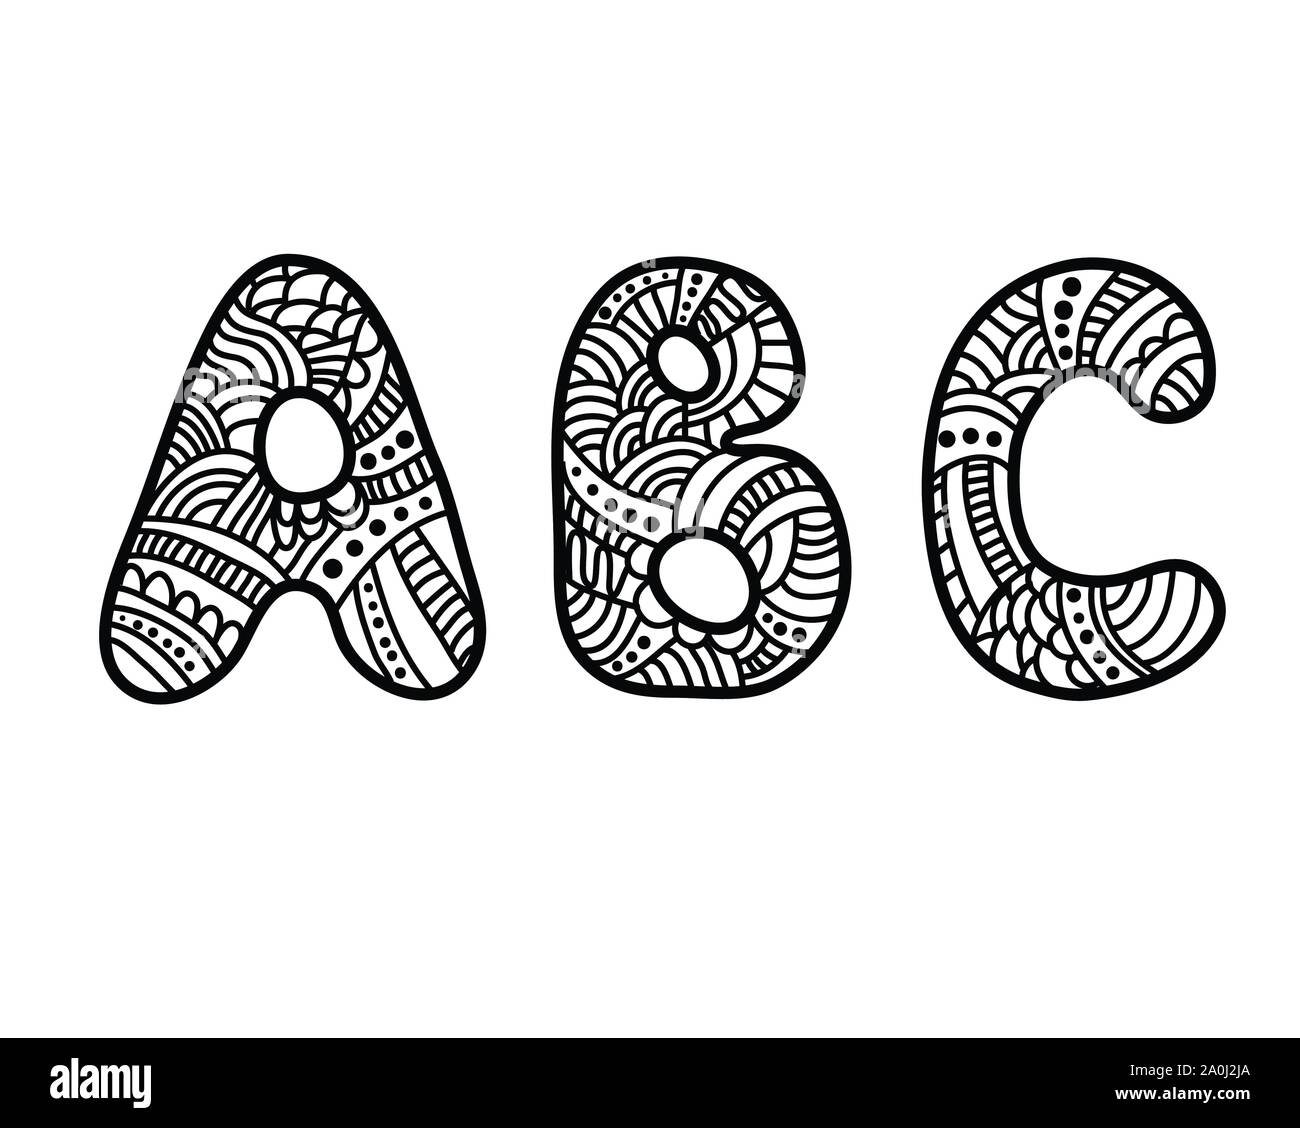 Brush Hand Drawn Big And Small Letters Stock Illustration